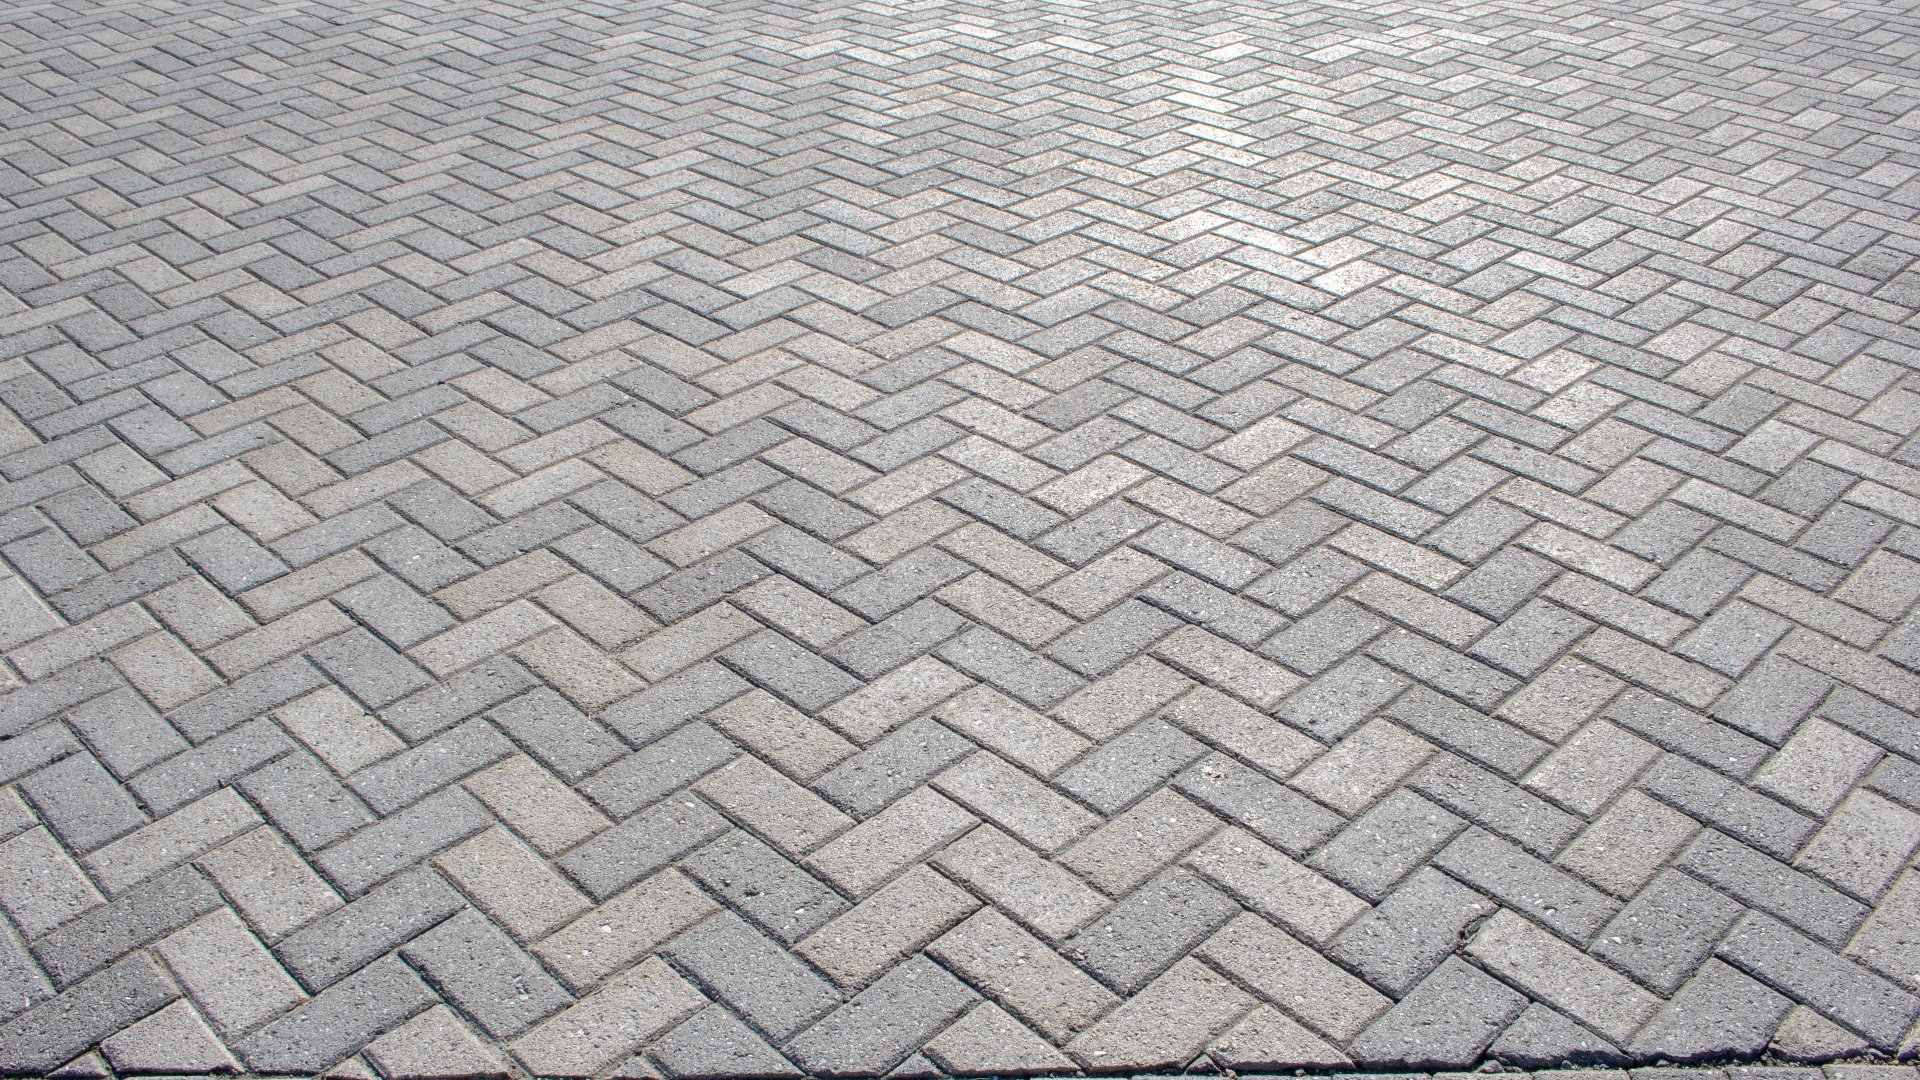 If You Are Planning on Using Pavers for Your New Patio, Consider These Patterns!